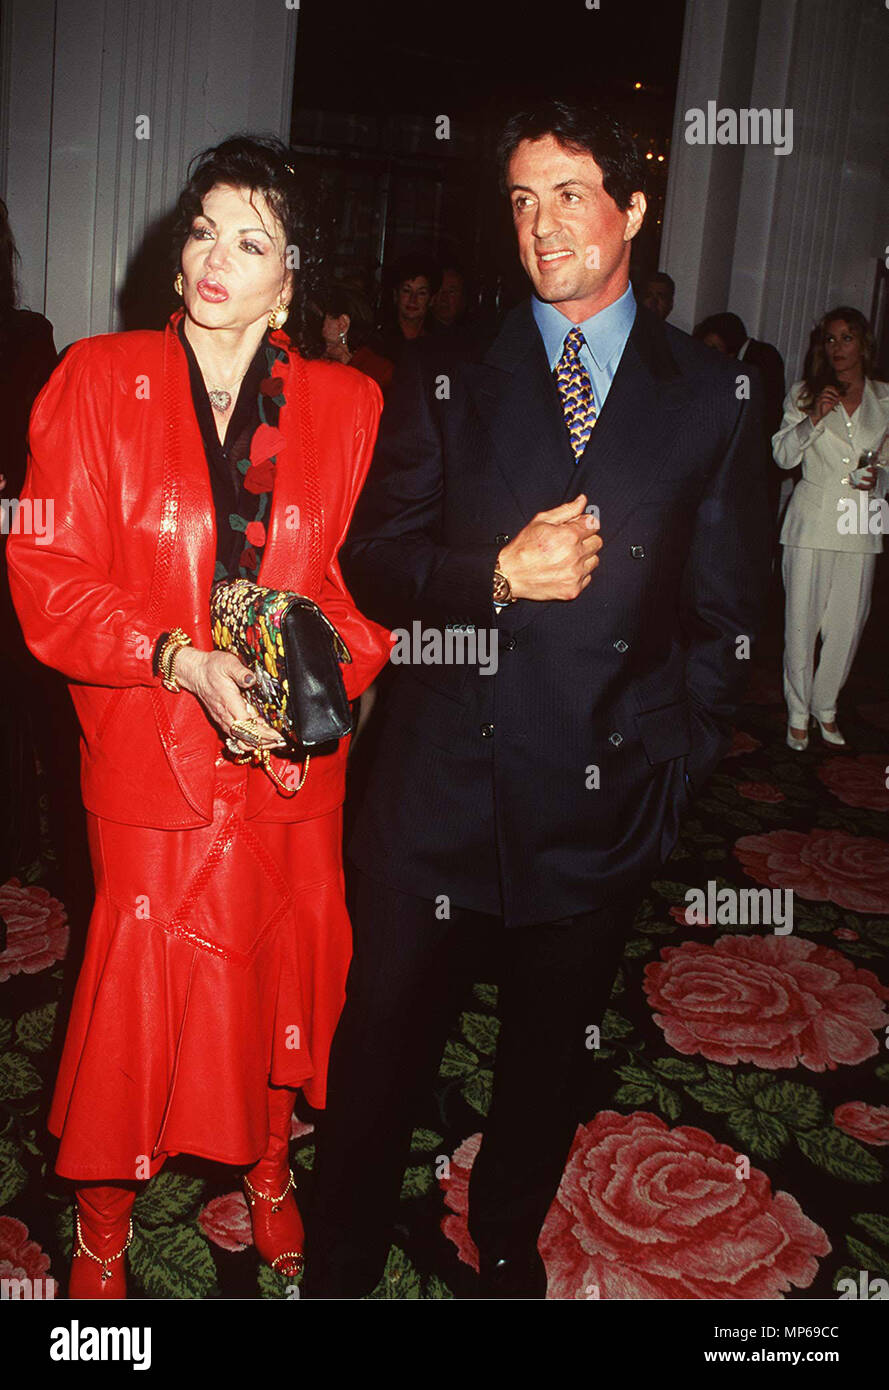 jackie stallone and sylvester stallone